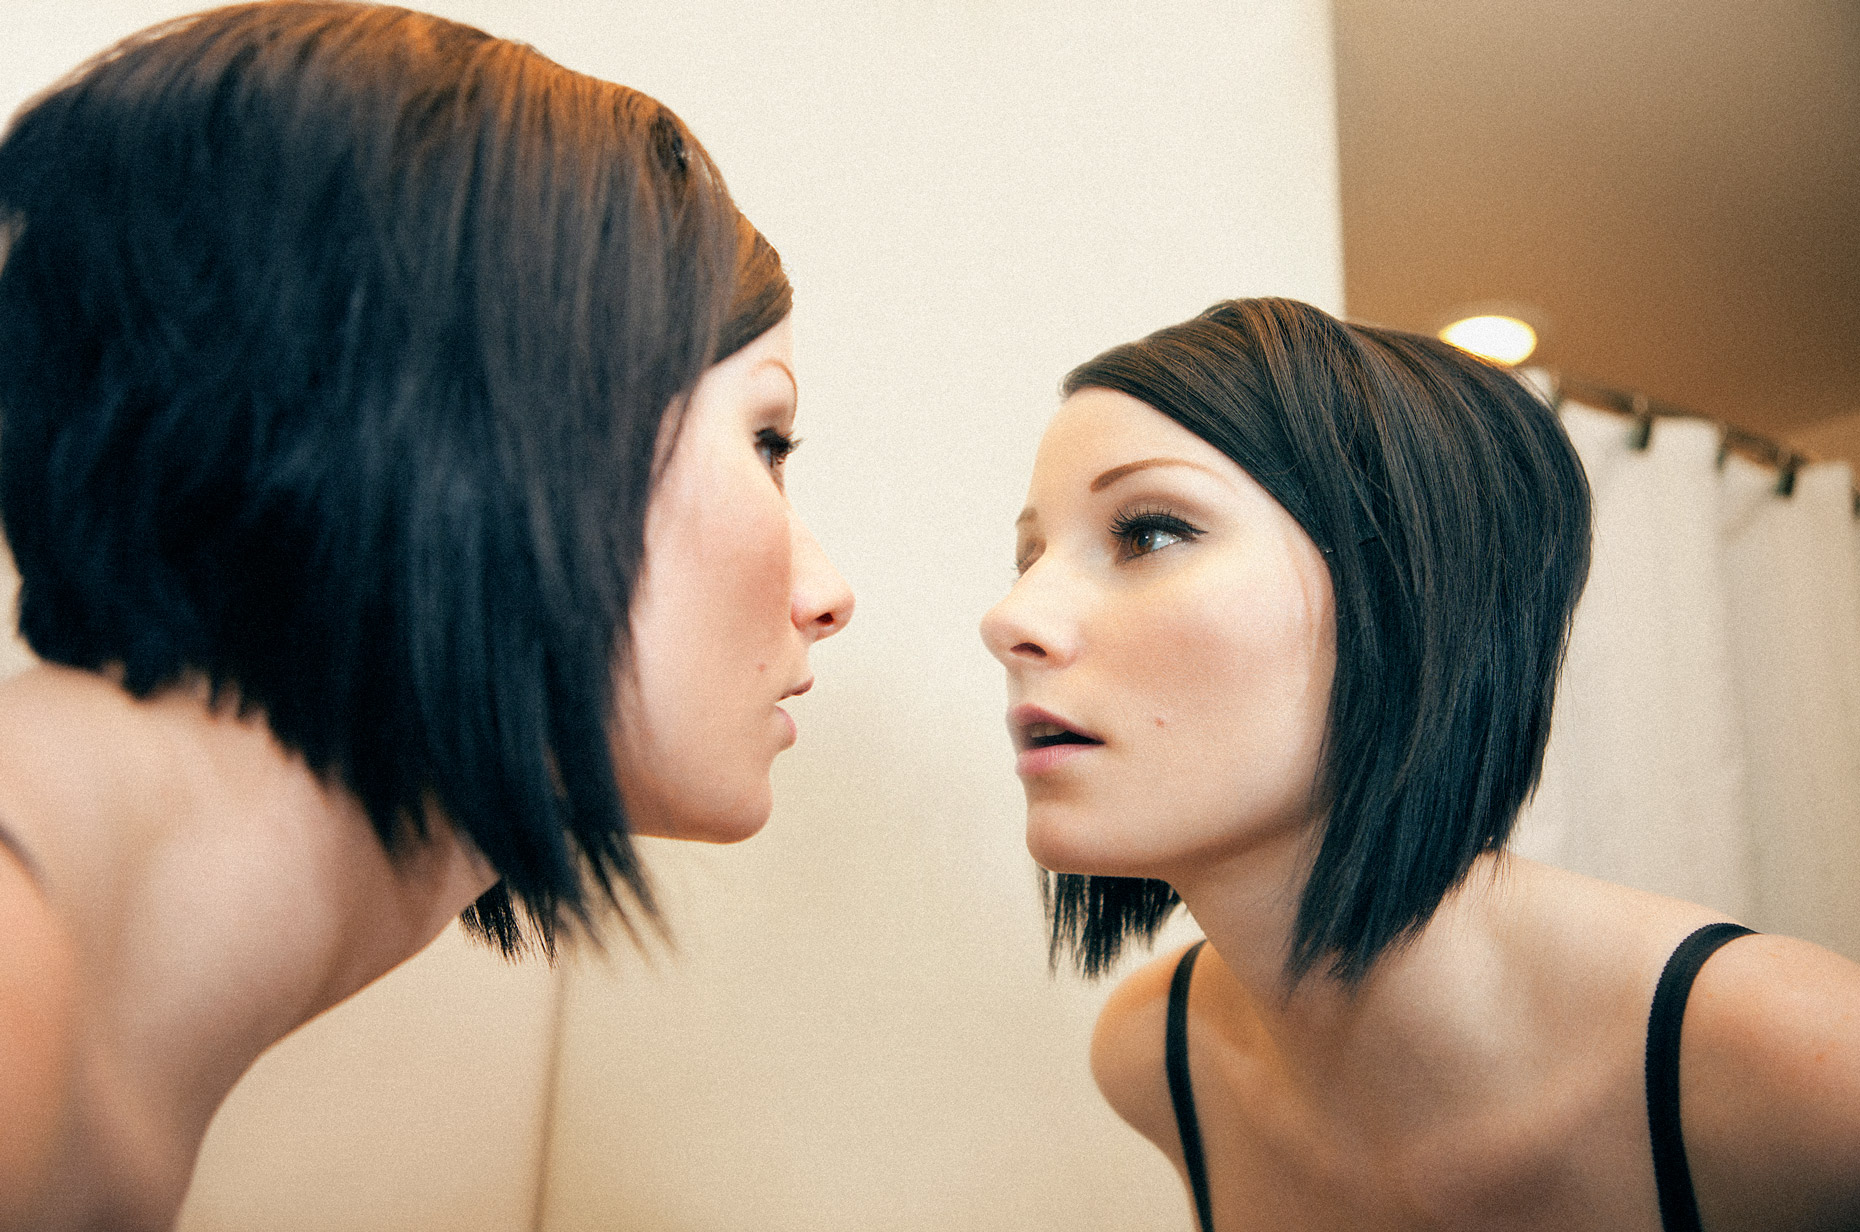 Woman looking at herself in the mirror | Conceptual Portait by Saverio Truglia